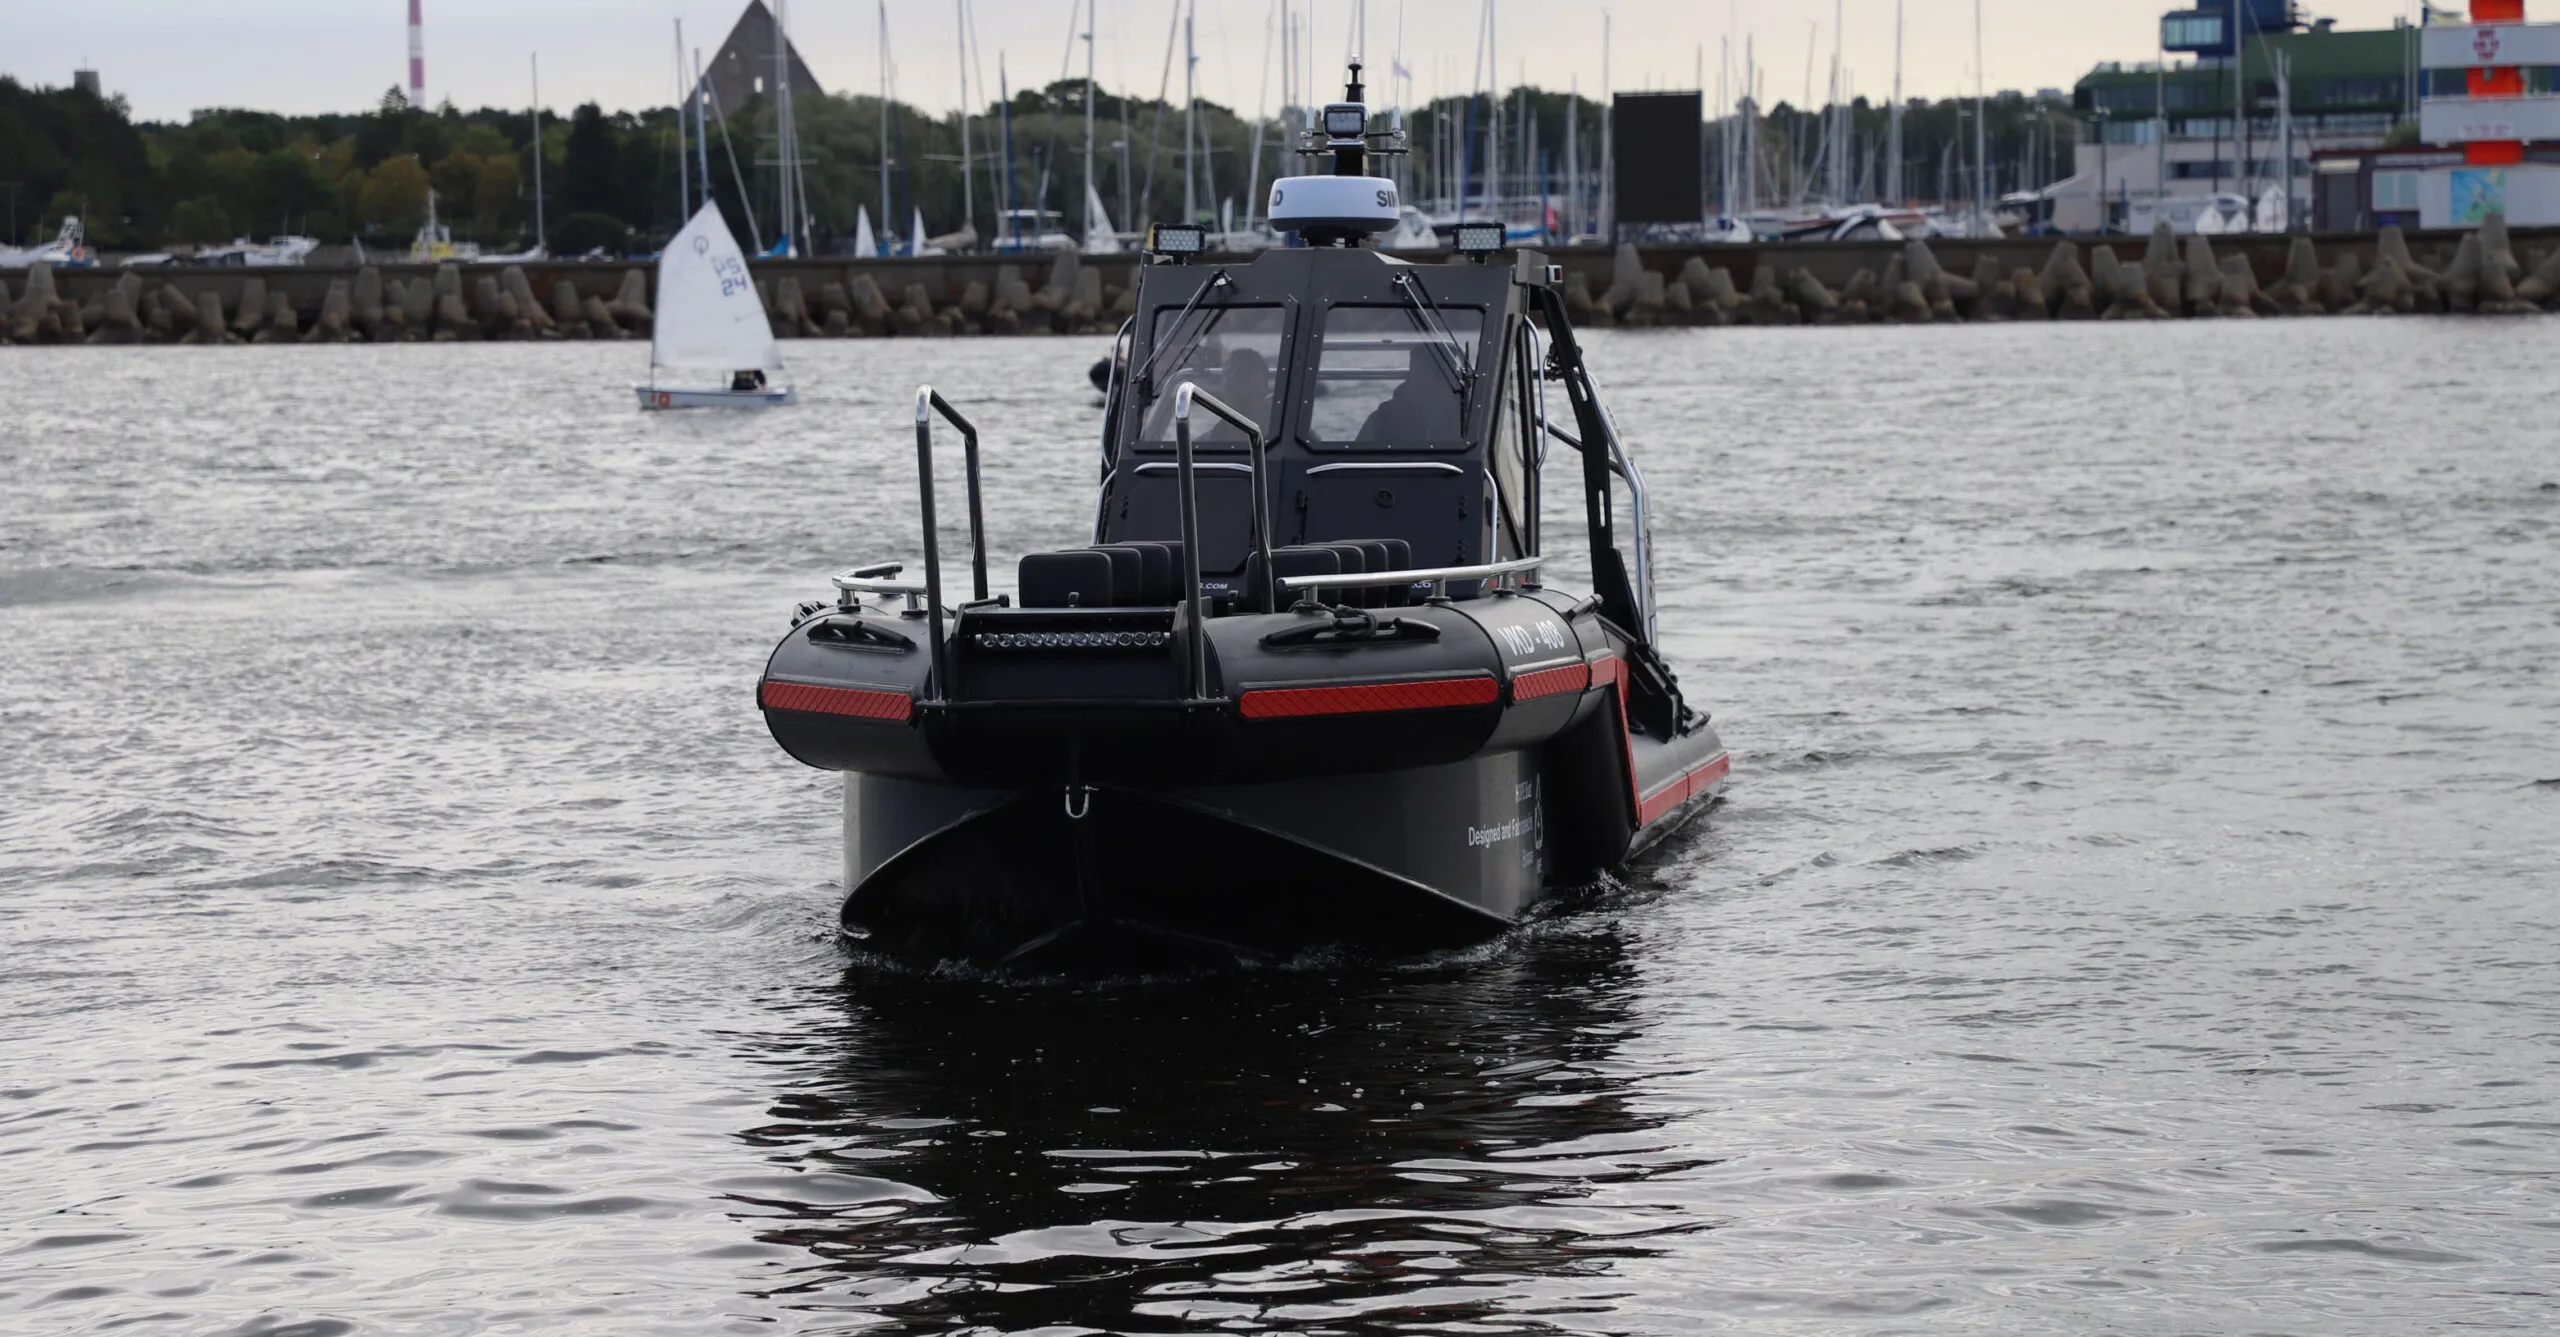 View of a TS Boats vessel on calm waters, featuring a cabin and dual outboard motors, with a marina and sailing boats in the background